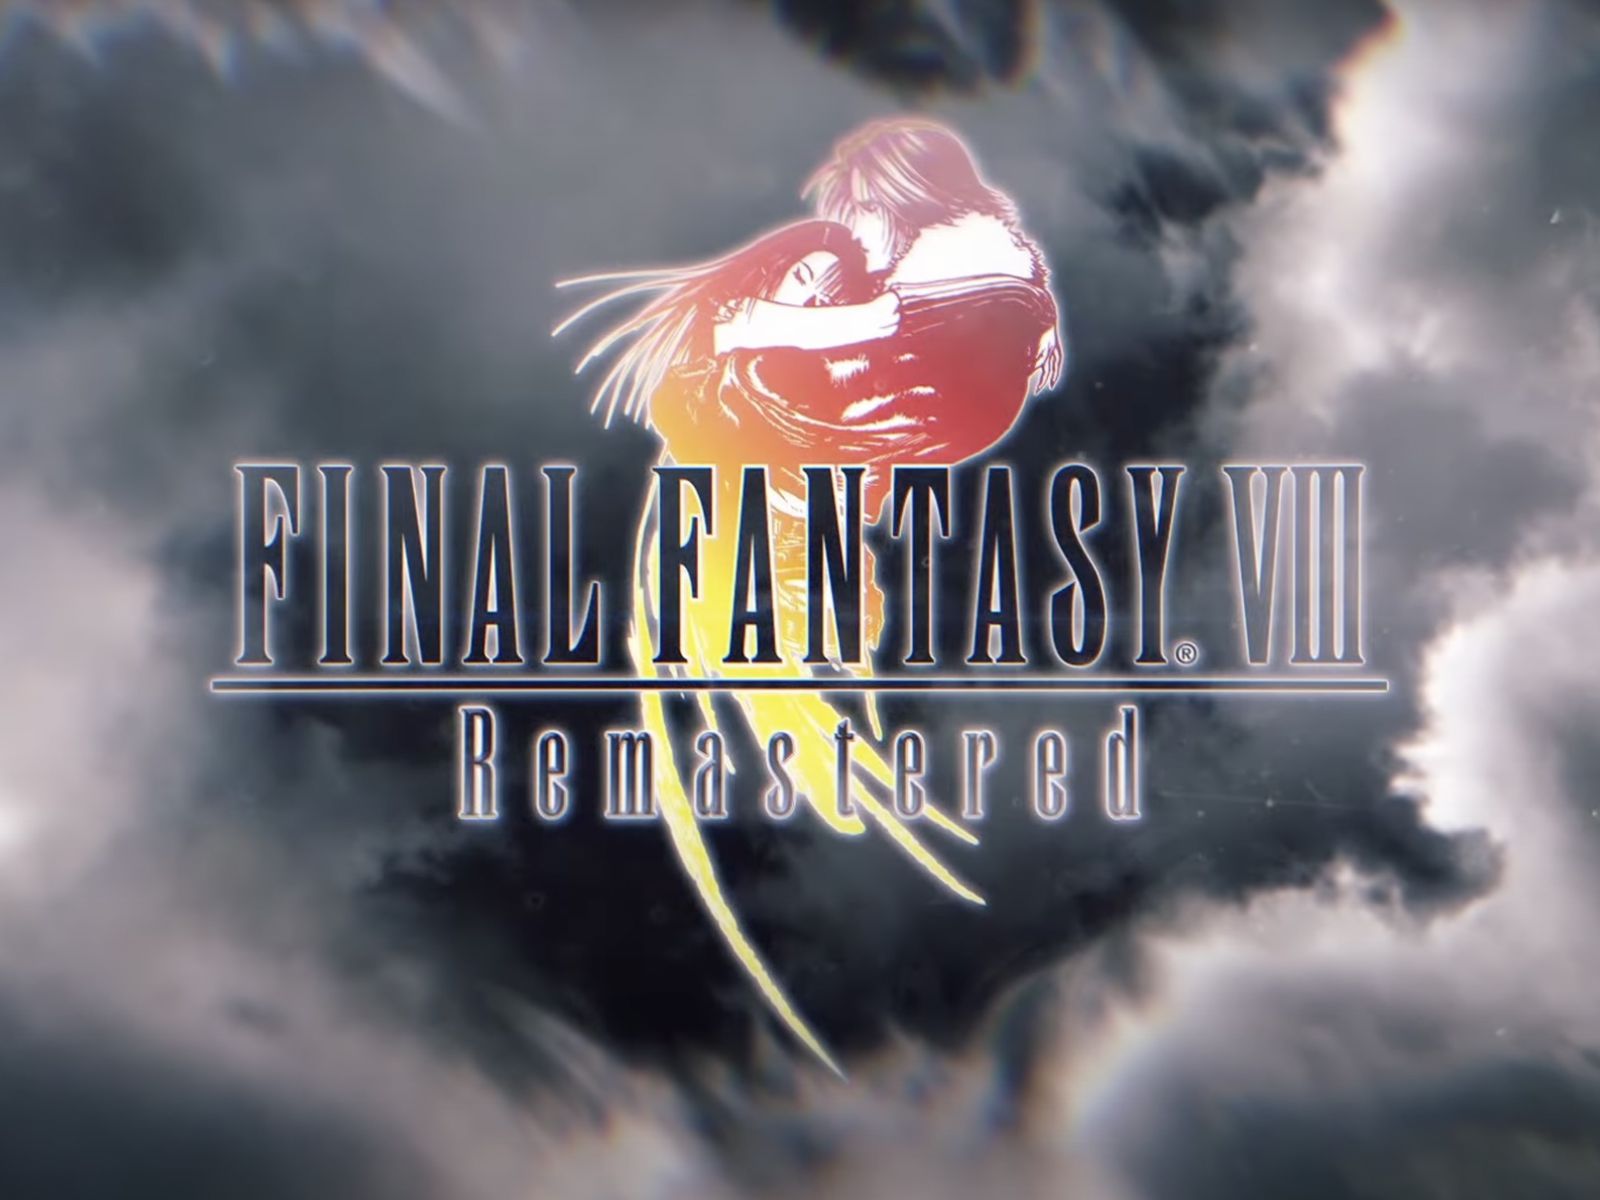 Final Fantasy Viii Remastered Now Available On Iphone And Ipad Macrumors